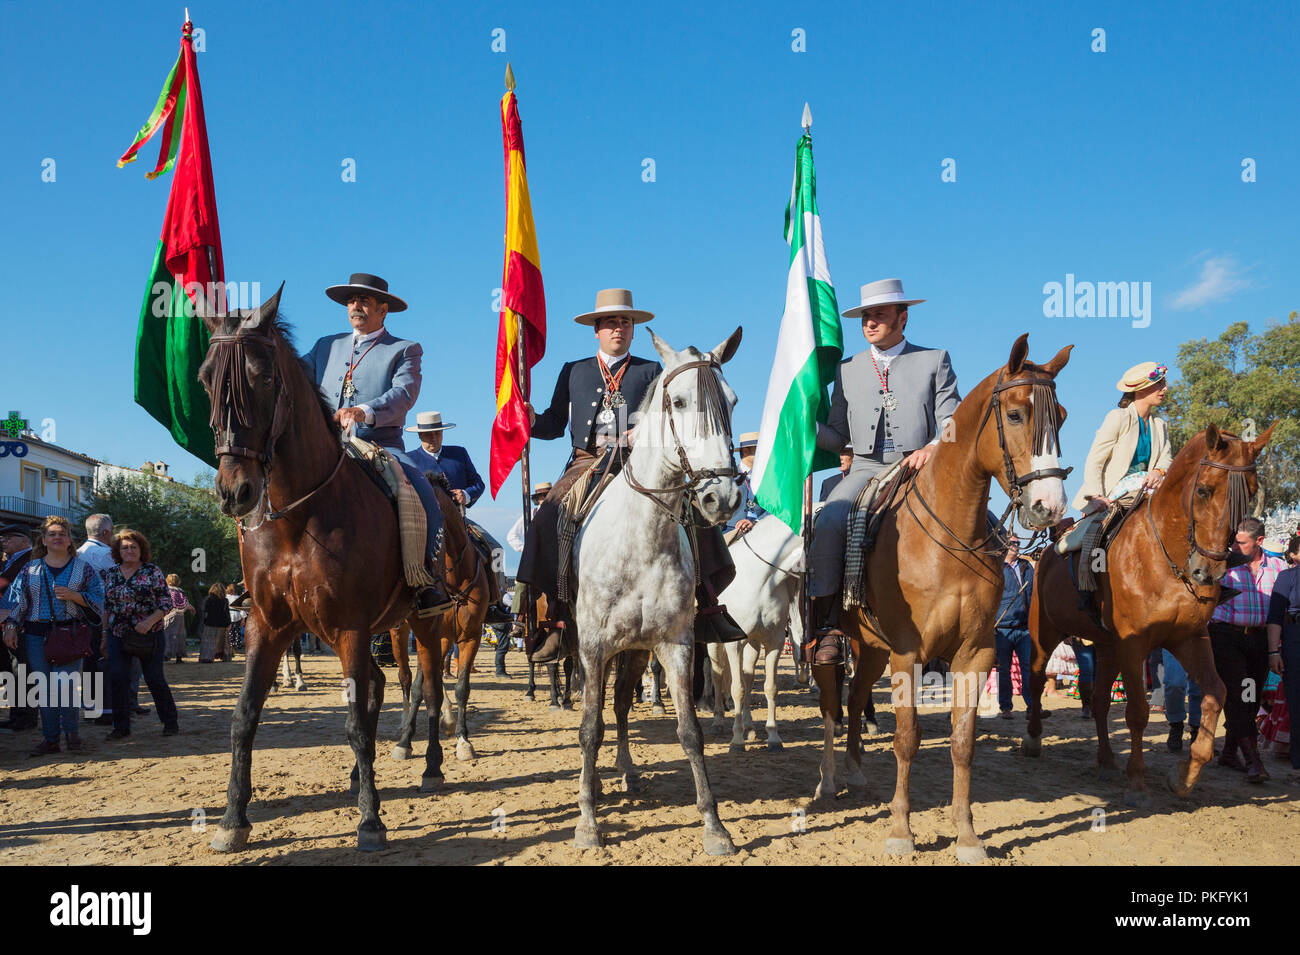 People in traditional clothes riding horses, Pentecost pilgrimage of El Rocio, Huelva province, Andalusia, Spain Stock Photo